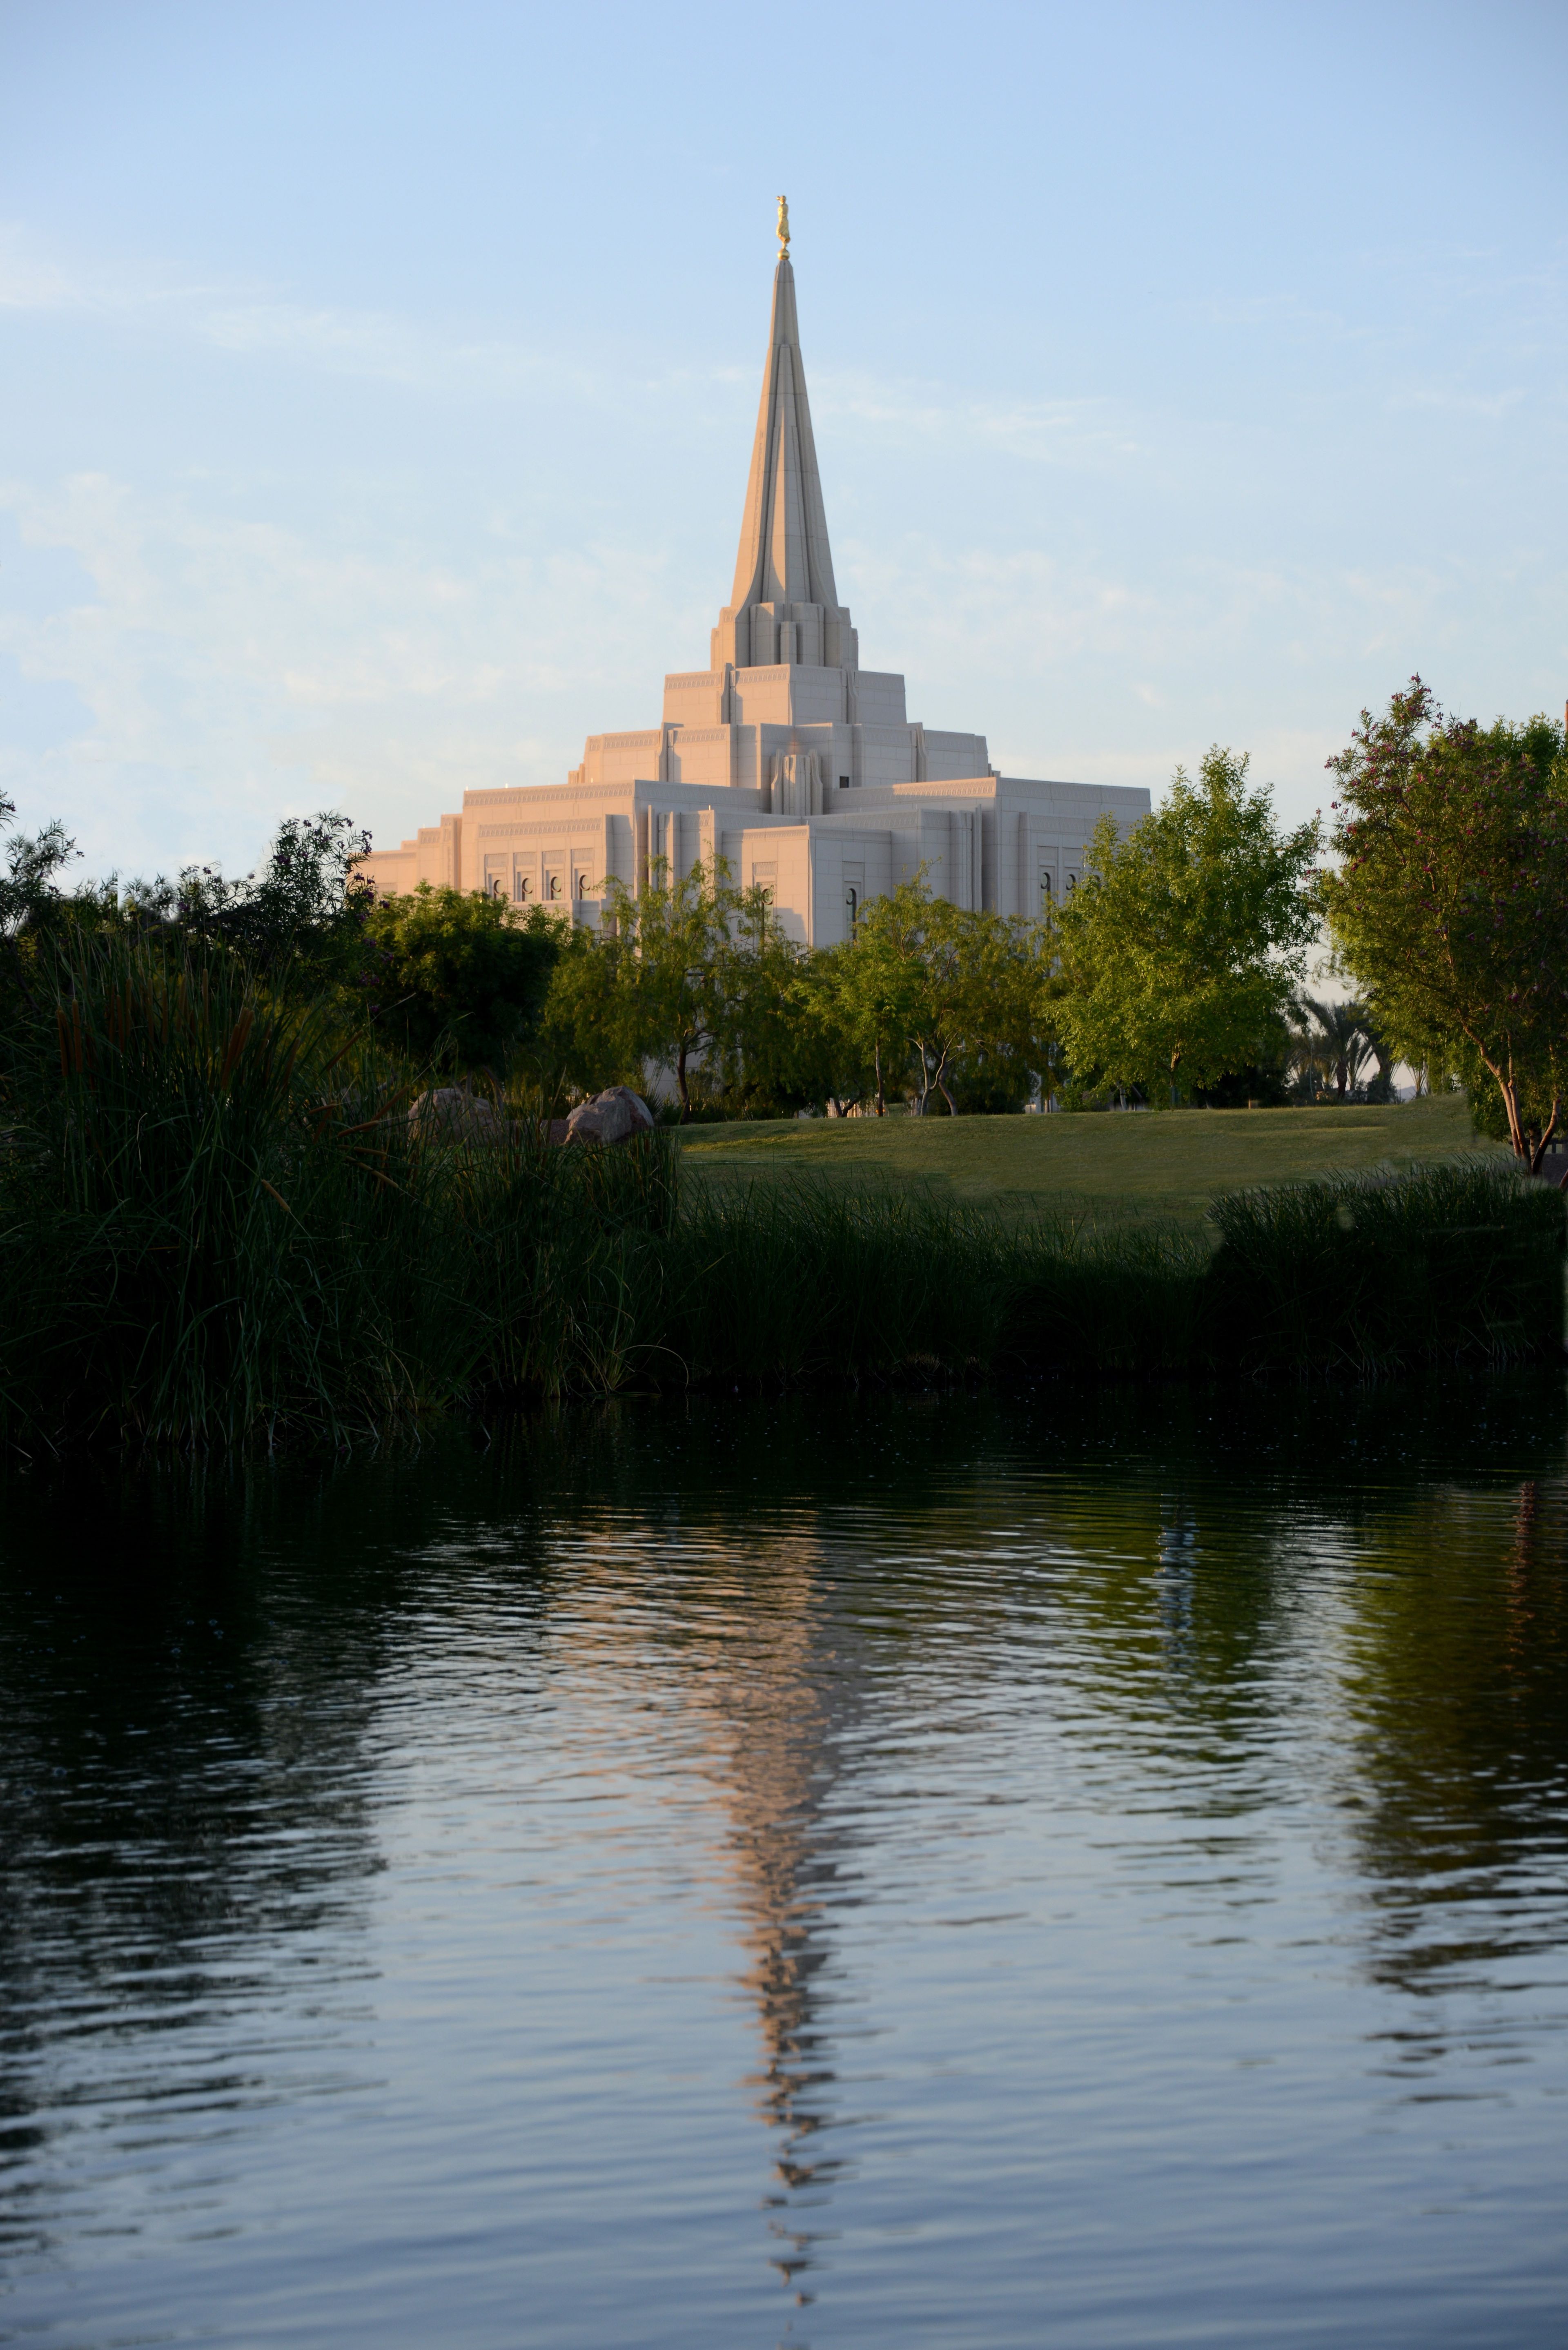 The reflection of the Gilbert Arizona Temple is seen in a nearby body of water.